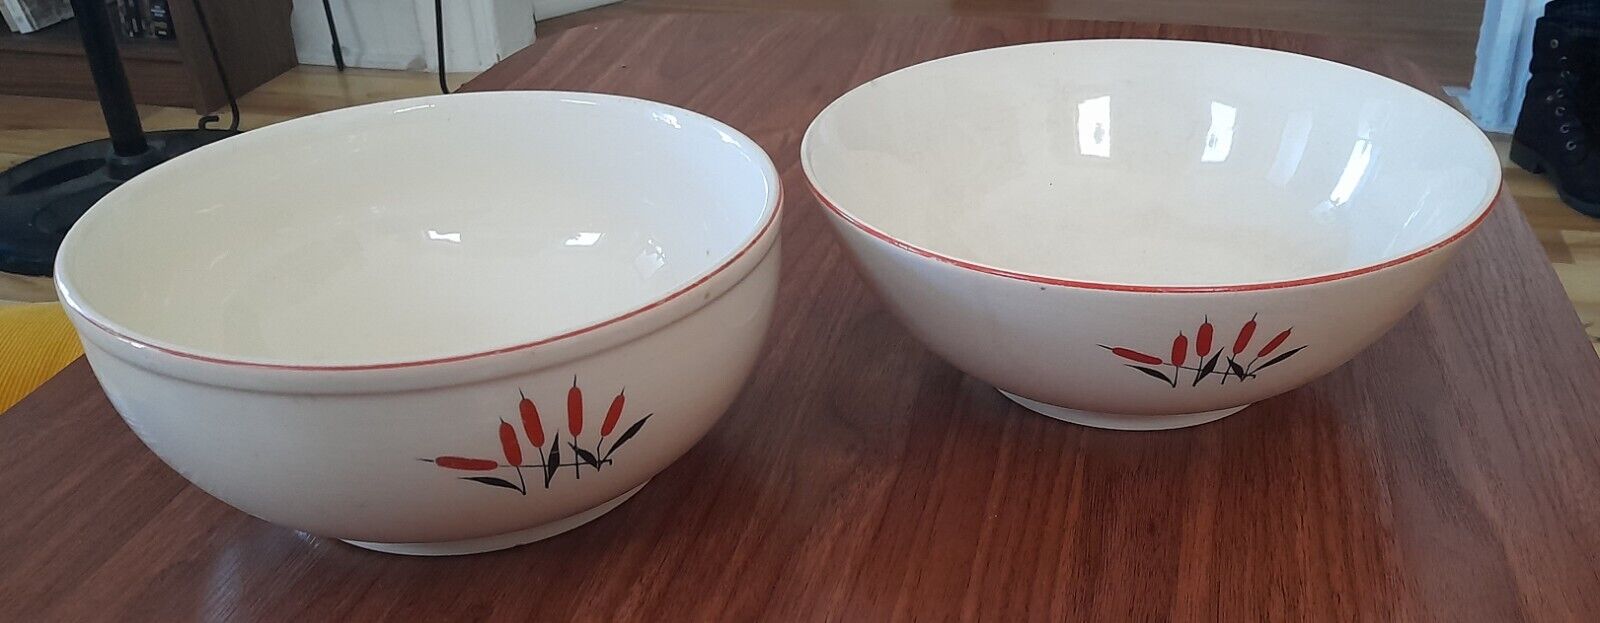 2 Vintage Sears Roebuck and Co Cattail oven-proof large serving bowls